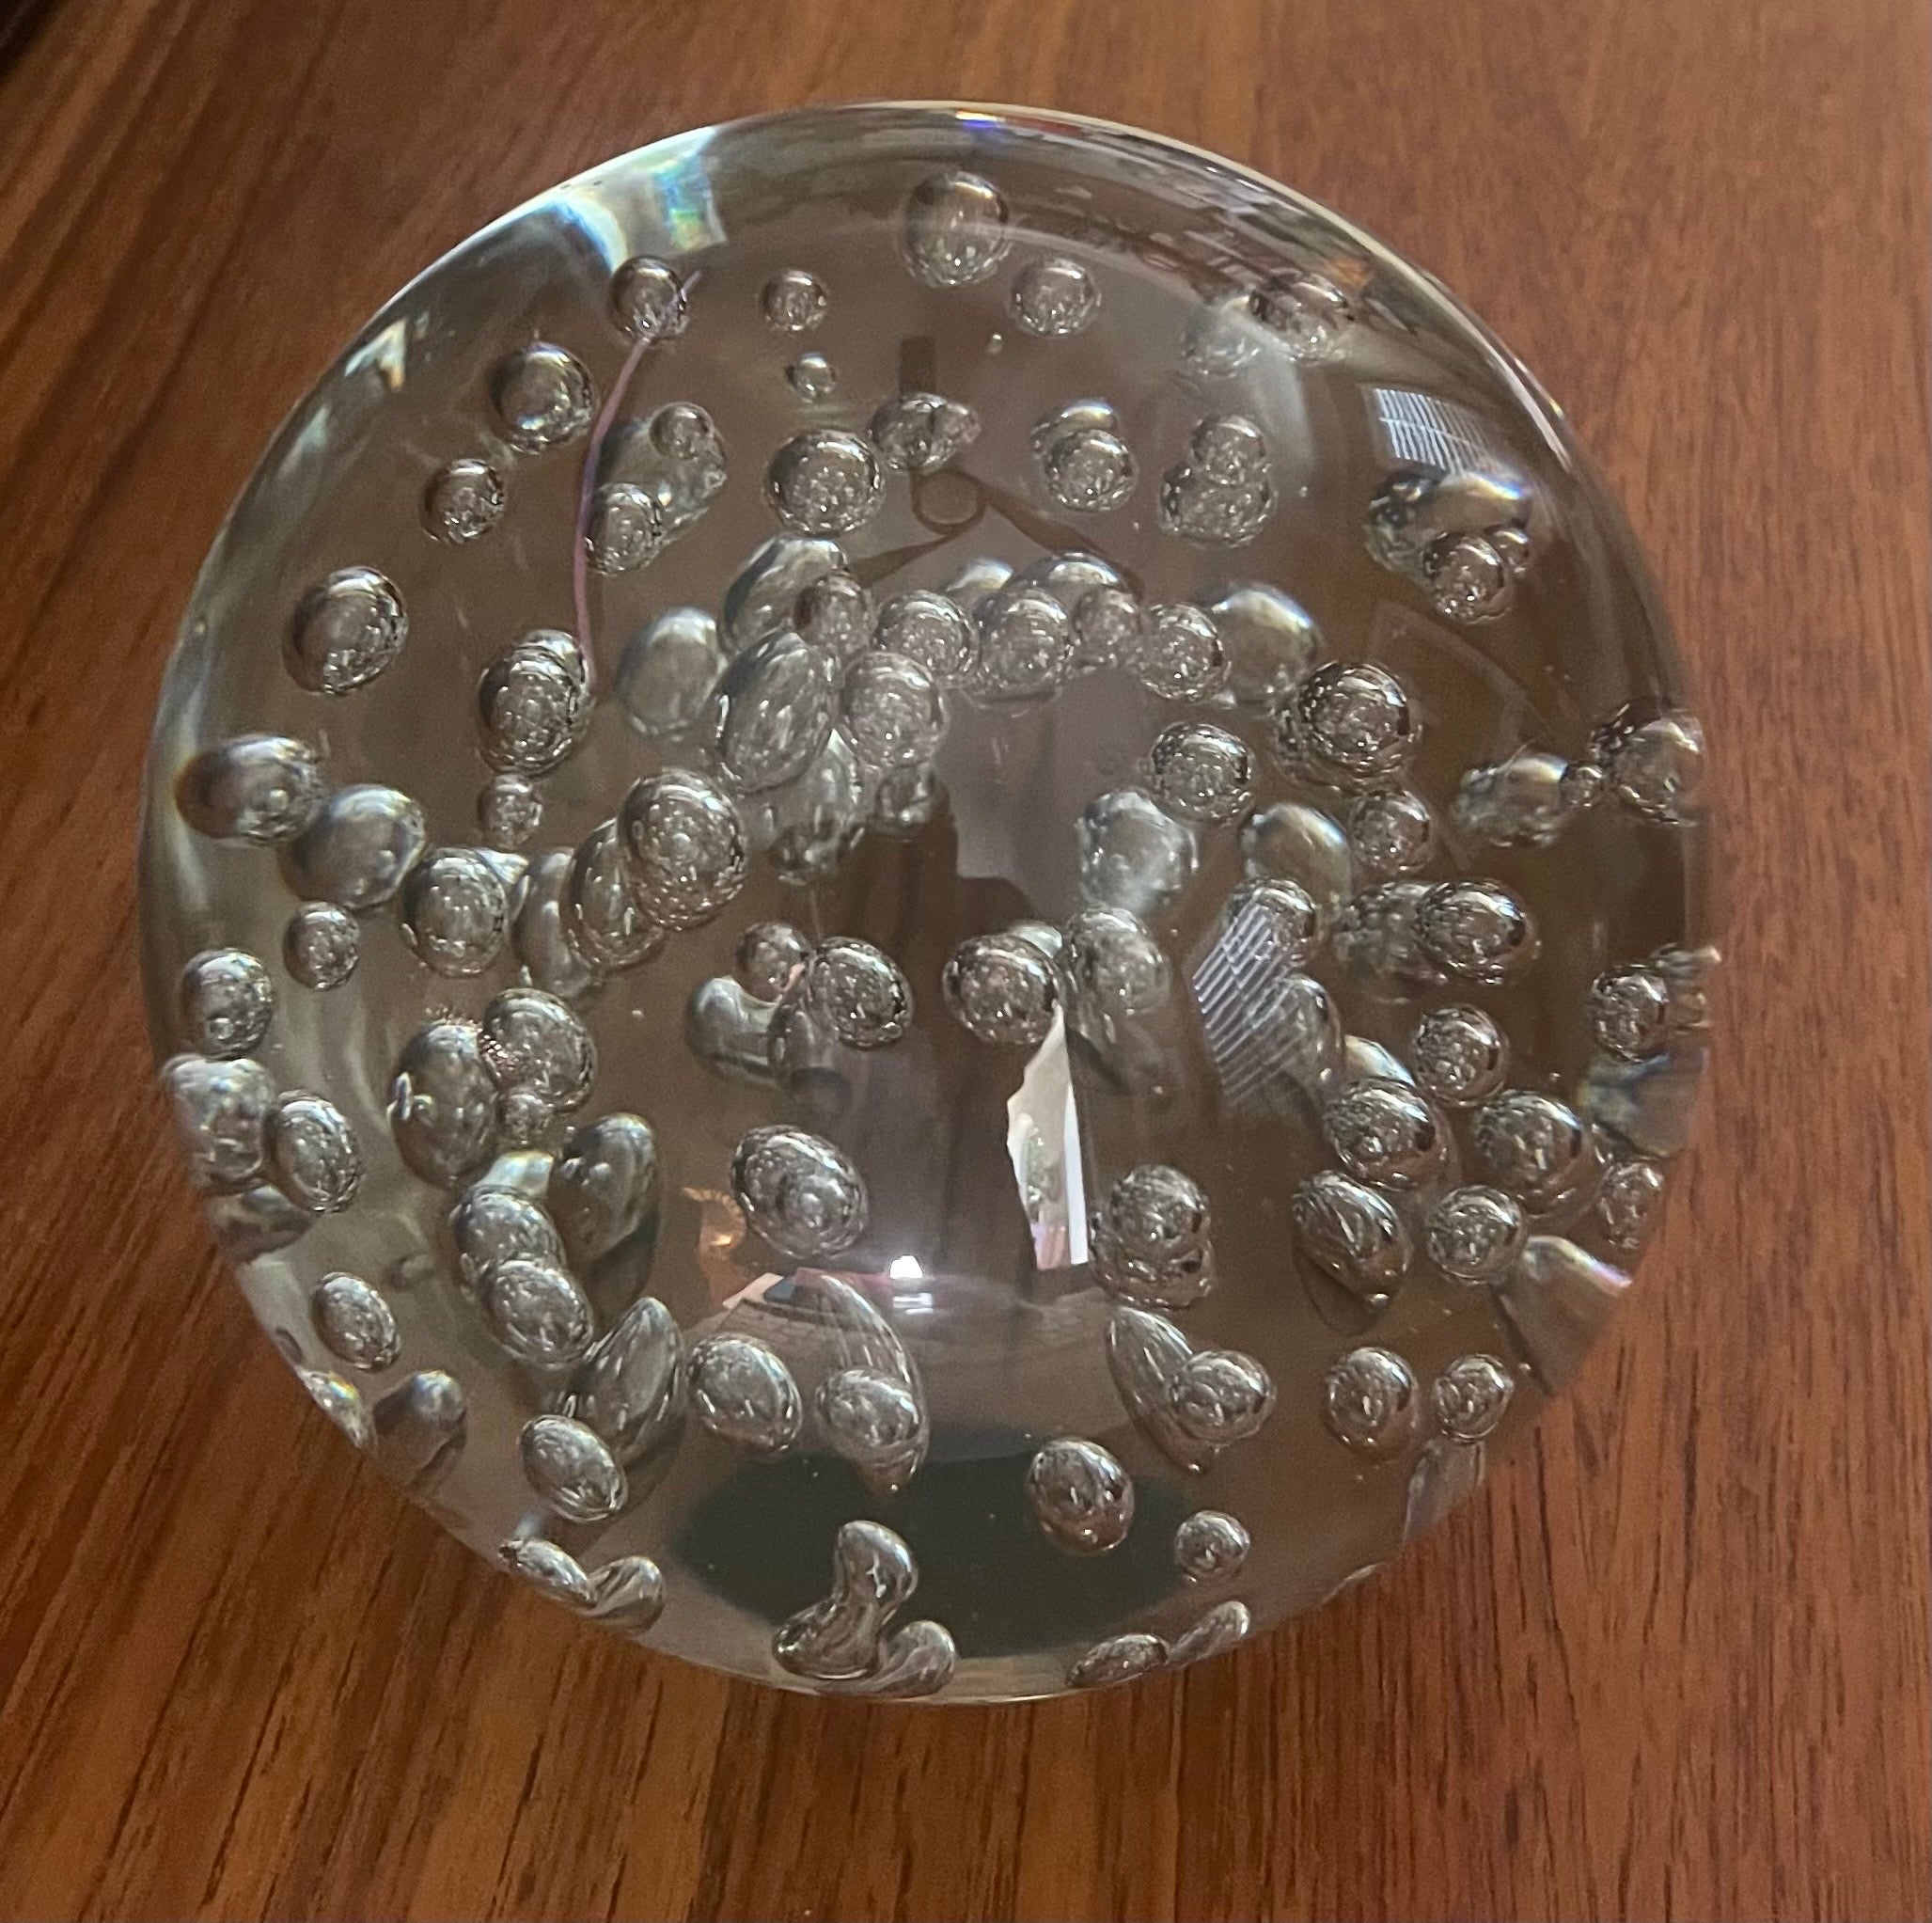 A large clear art glass orb sculpture or paperweight with bubbles, circa 1990. The orb is layered with internal air bubbles and measures 6.6